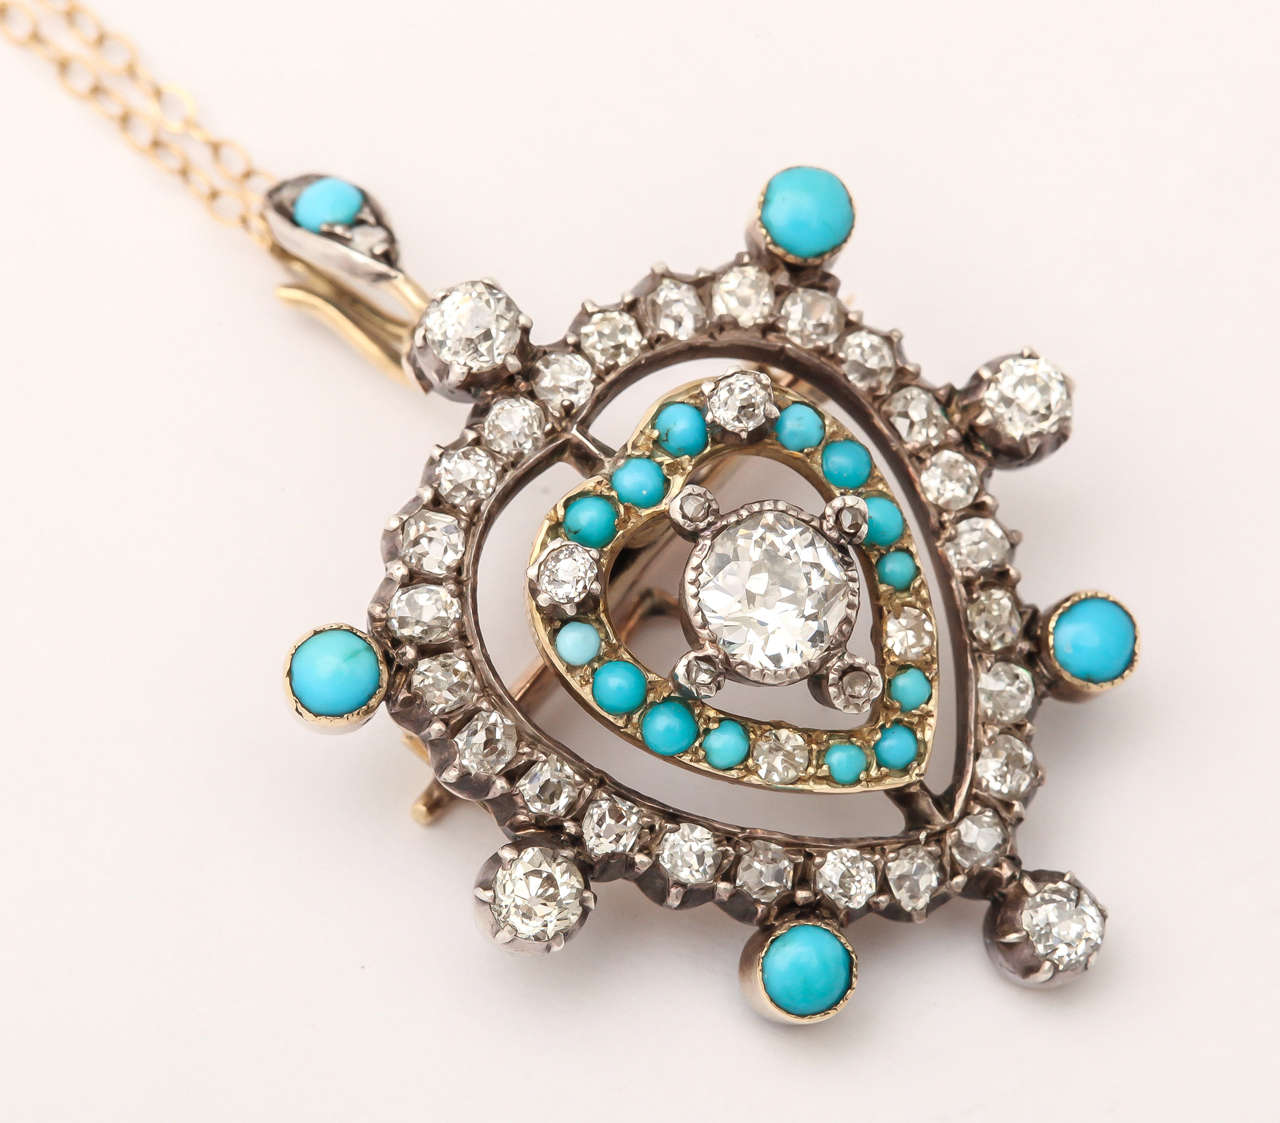 A gift of a lifetime, this exquisite diamond and turquoise antique jewel was made as a pendant and a brooch. Behind the pendant is a pin that ingeniously unscrews so that the heart lays flat at the neck. A photo, untouched, cannot show you the